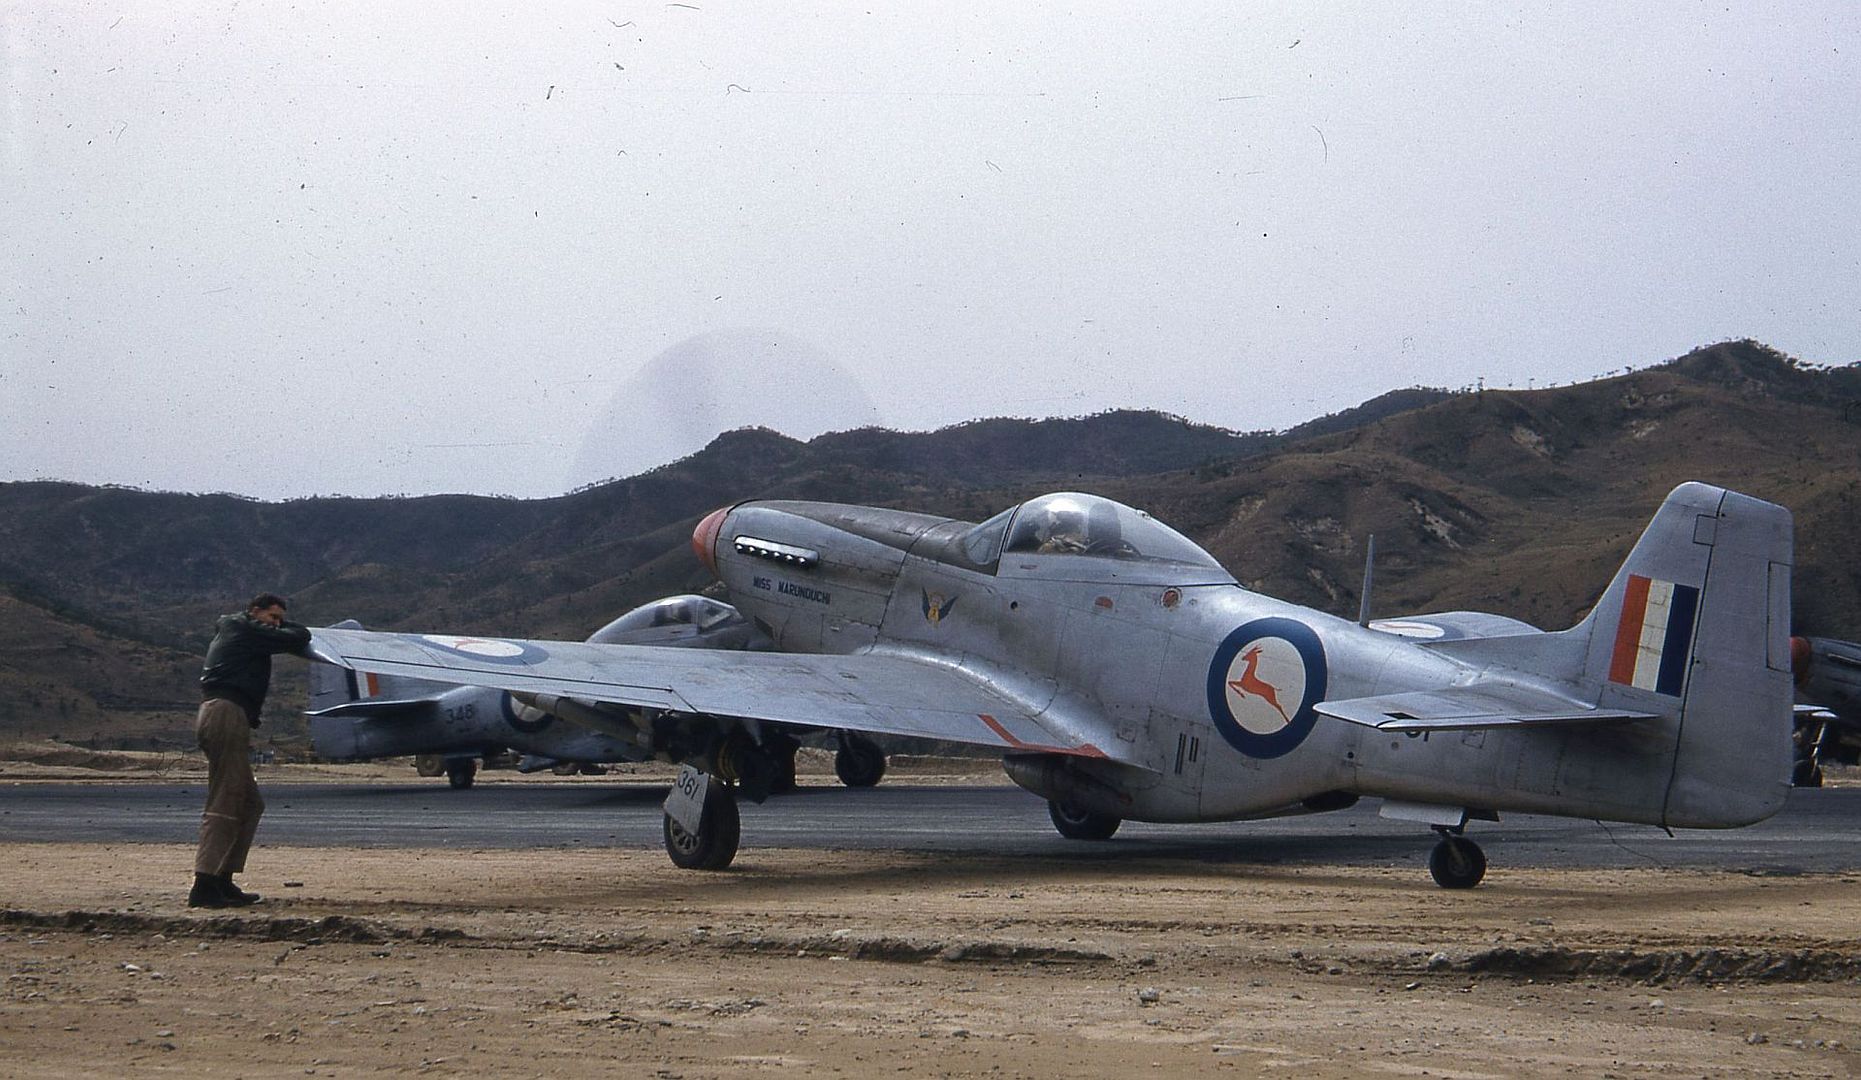 One_half_left_rear_view_of_a_North_American_Mustang_Mk._IVA_Miss_Marunouchi_sn_KM361_parked_beside_the_runway_somewhere_in_Korea..jpg